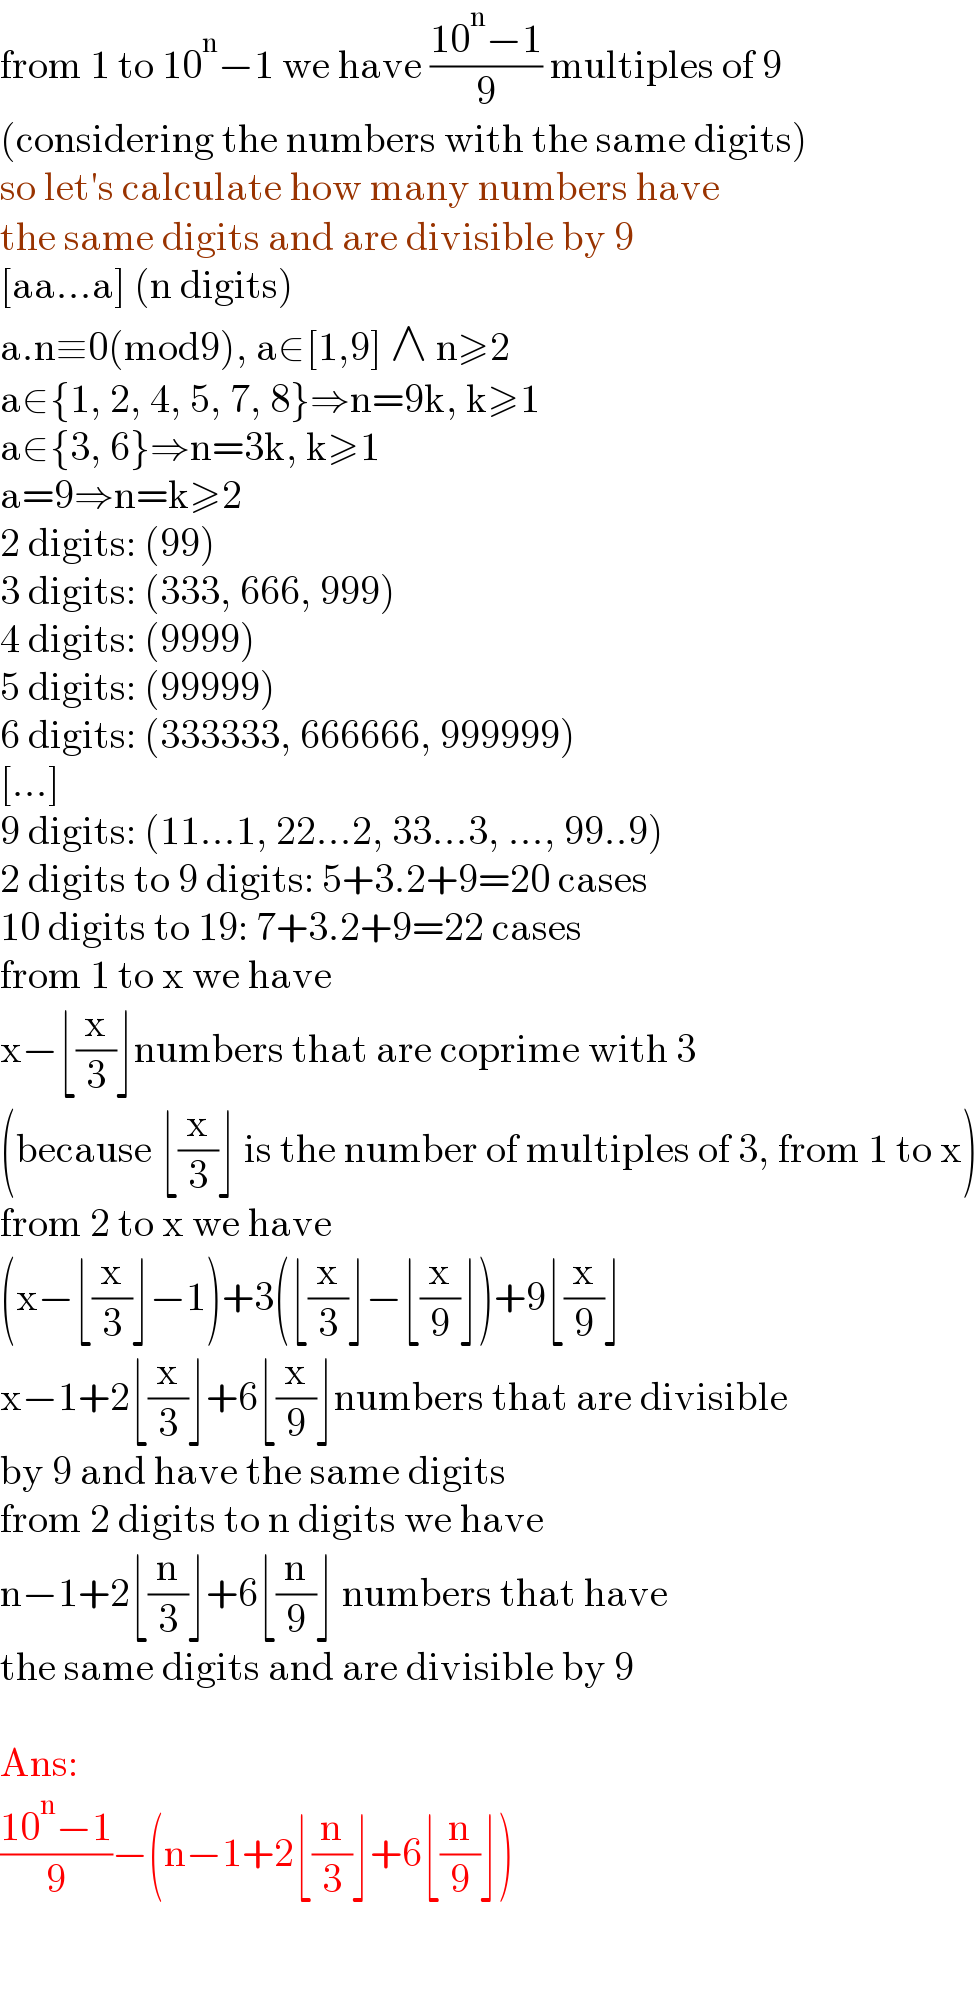 from 1 to 10^n −1 we have ((10^n −1)/9) multiples of 9  (considering the numbers with the same digits)  so let′s calculate how many numbers have   the same digits and are divisible by 9  [aa...a] (n digits)  a.n≡0(mod9), a∈[1,9] ∧ n≥2  a∈{1, 2, 4, 5, 7, 8}⇒n=9k, k≥1  a∈{3, 6}⇒n=3k, k≥1  a=9⇒n=k≥2  2 digits: (99)  3 digits: (333, 666, 999)  4 digits: (9999)  5 digits: (99999)  6 digits: (333333, 666666, 999999)  [...]  9 digits: (11...1, 22...2, 33...3, ..., 99..9)  2 digits to 9 digits: 5+3.2+9=20 cases  10 digits to 19: 7+3.2+9=22 cases  from 1 to x we have  x−⌊(x/3)⌋numbers that are coprime with 3  (because ⌊(x/3)⌋ is the number of multiples of 3, from 1 to x)  from 2 to x we have  (x−⌊(x/3)⌋−1)+3(⌊(x/3)⌋−⌊(x/9)⌋)+9⌊(x/9)⌋  x−1+2⌊(x/3)⌋+6⌊(x/9)⌋numbers that are divisible  by 9 and have the same digits  from 2 digits to n digits we have  n−1+2⌊(n/3)⌋+6⌊(n/9)⌋ numbers that have  the same digits and are divisible by 9    Ans:  ((10^n −1)/9)−(n−1+2⌊(n/3)⌋+6⌊(n/9)⌋)    